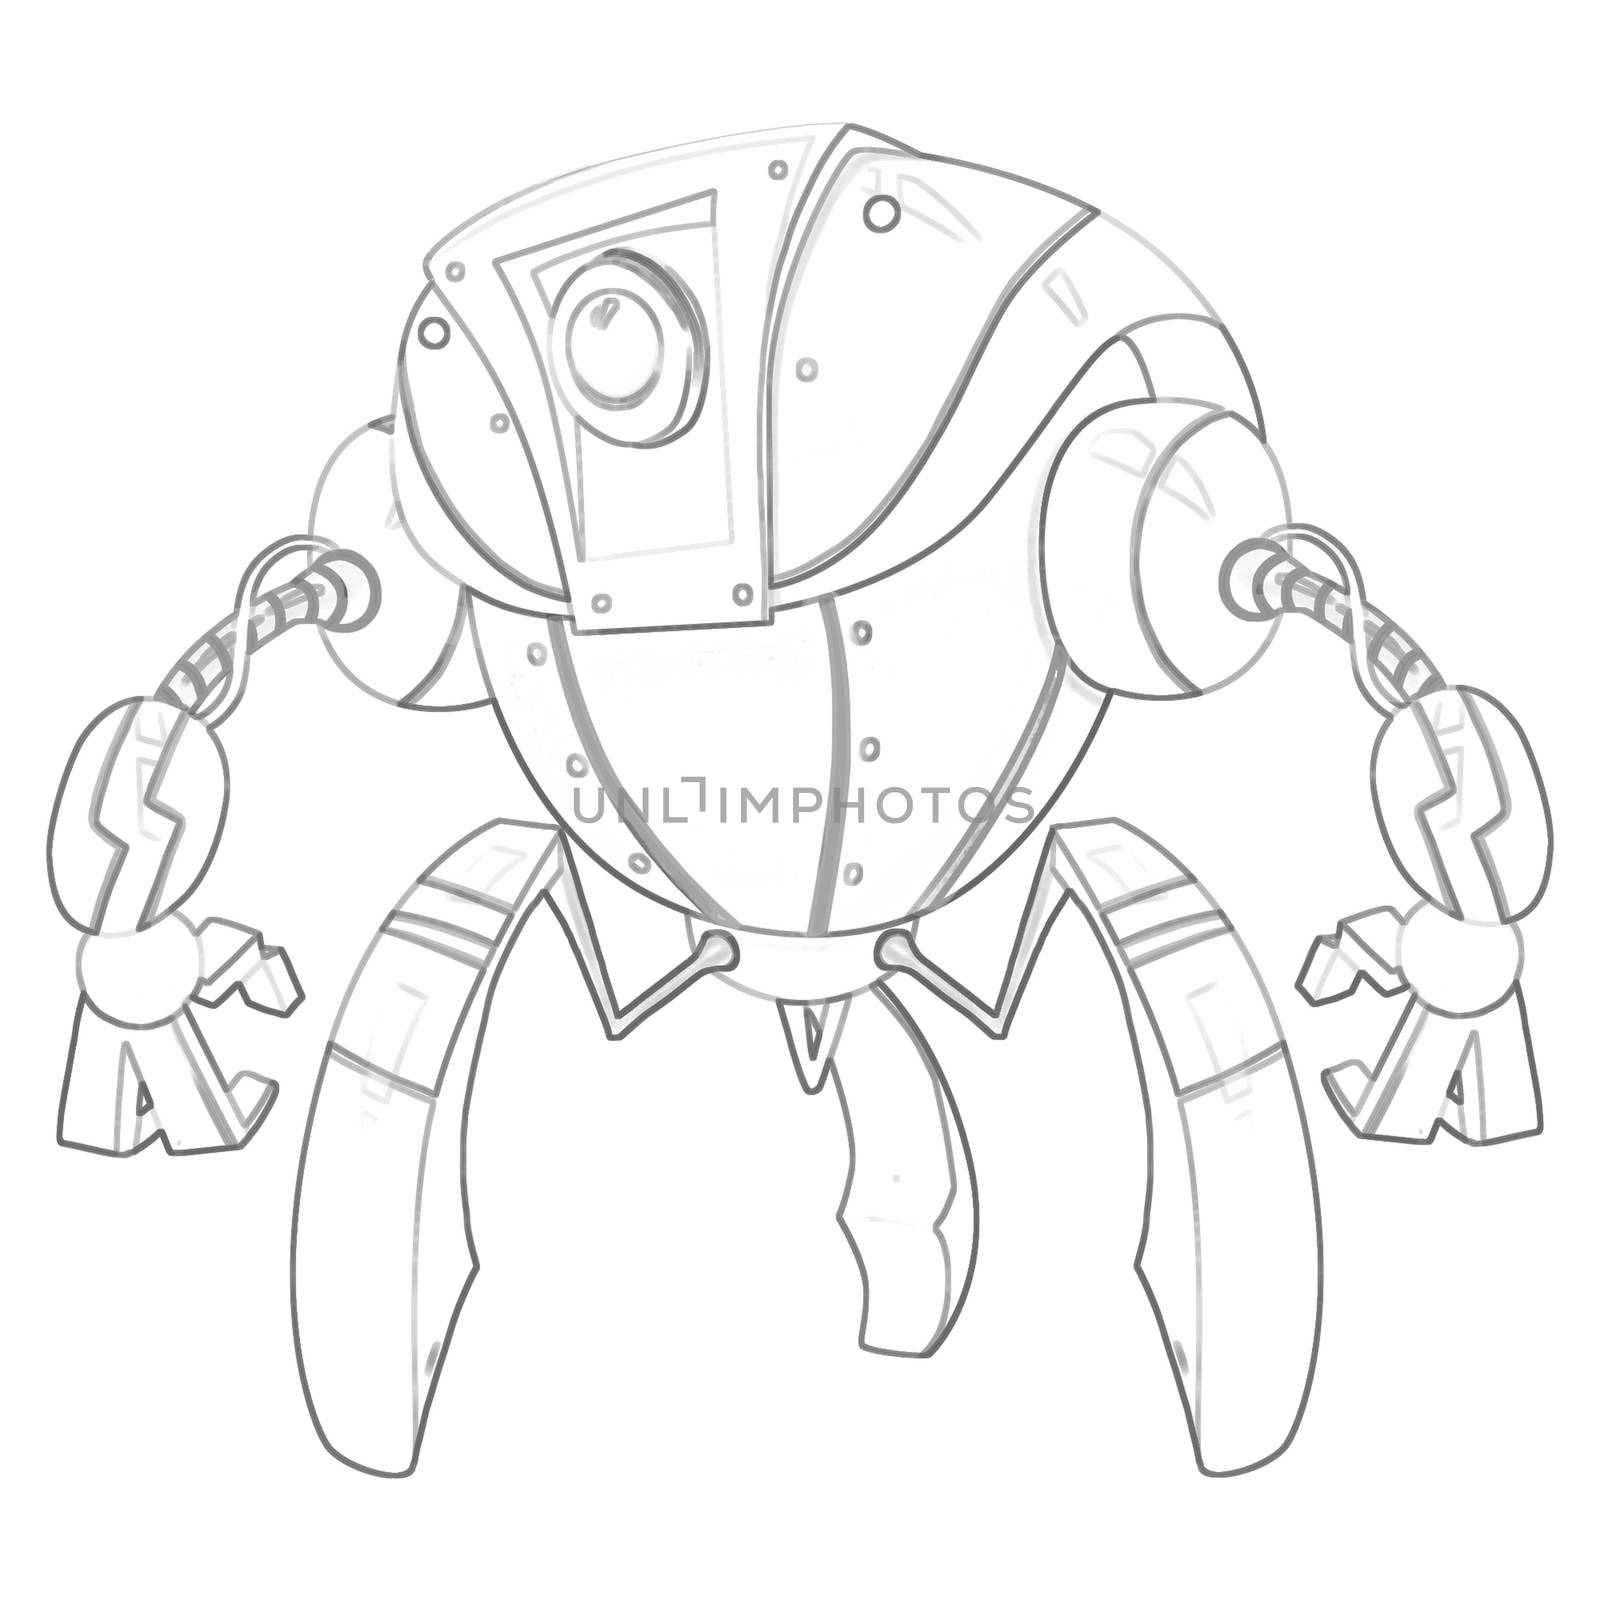 Illustration: Coloring Book Series: Robot. Soft thin line. Print it and bring it to Life with Color! Fantastic Outline / Sketch / Line Art Design.